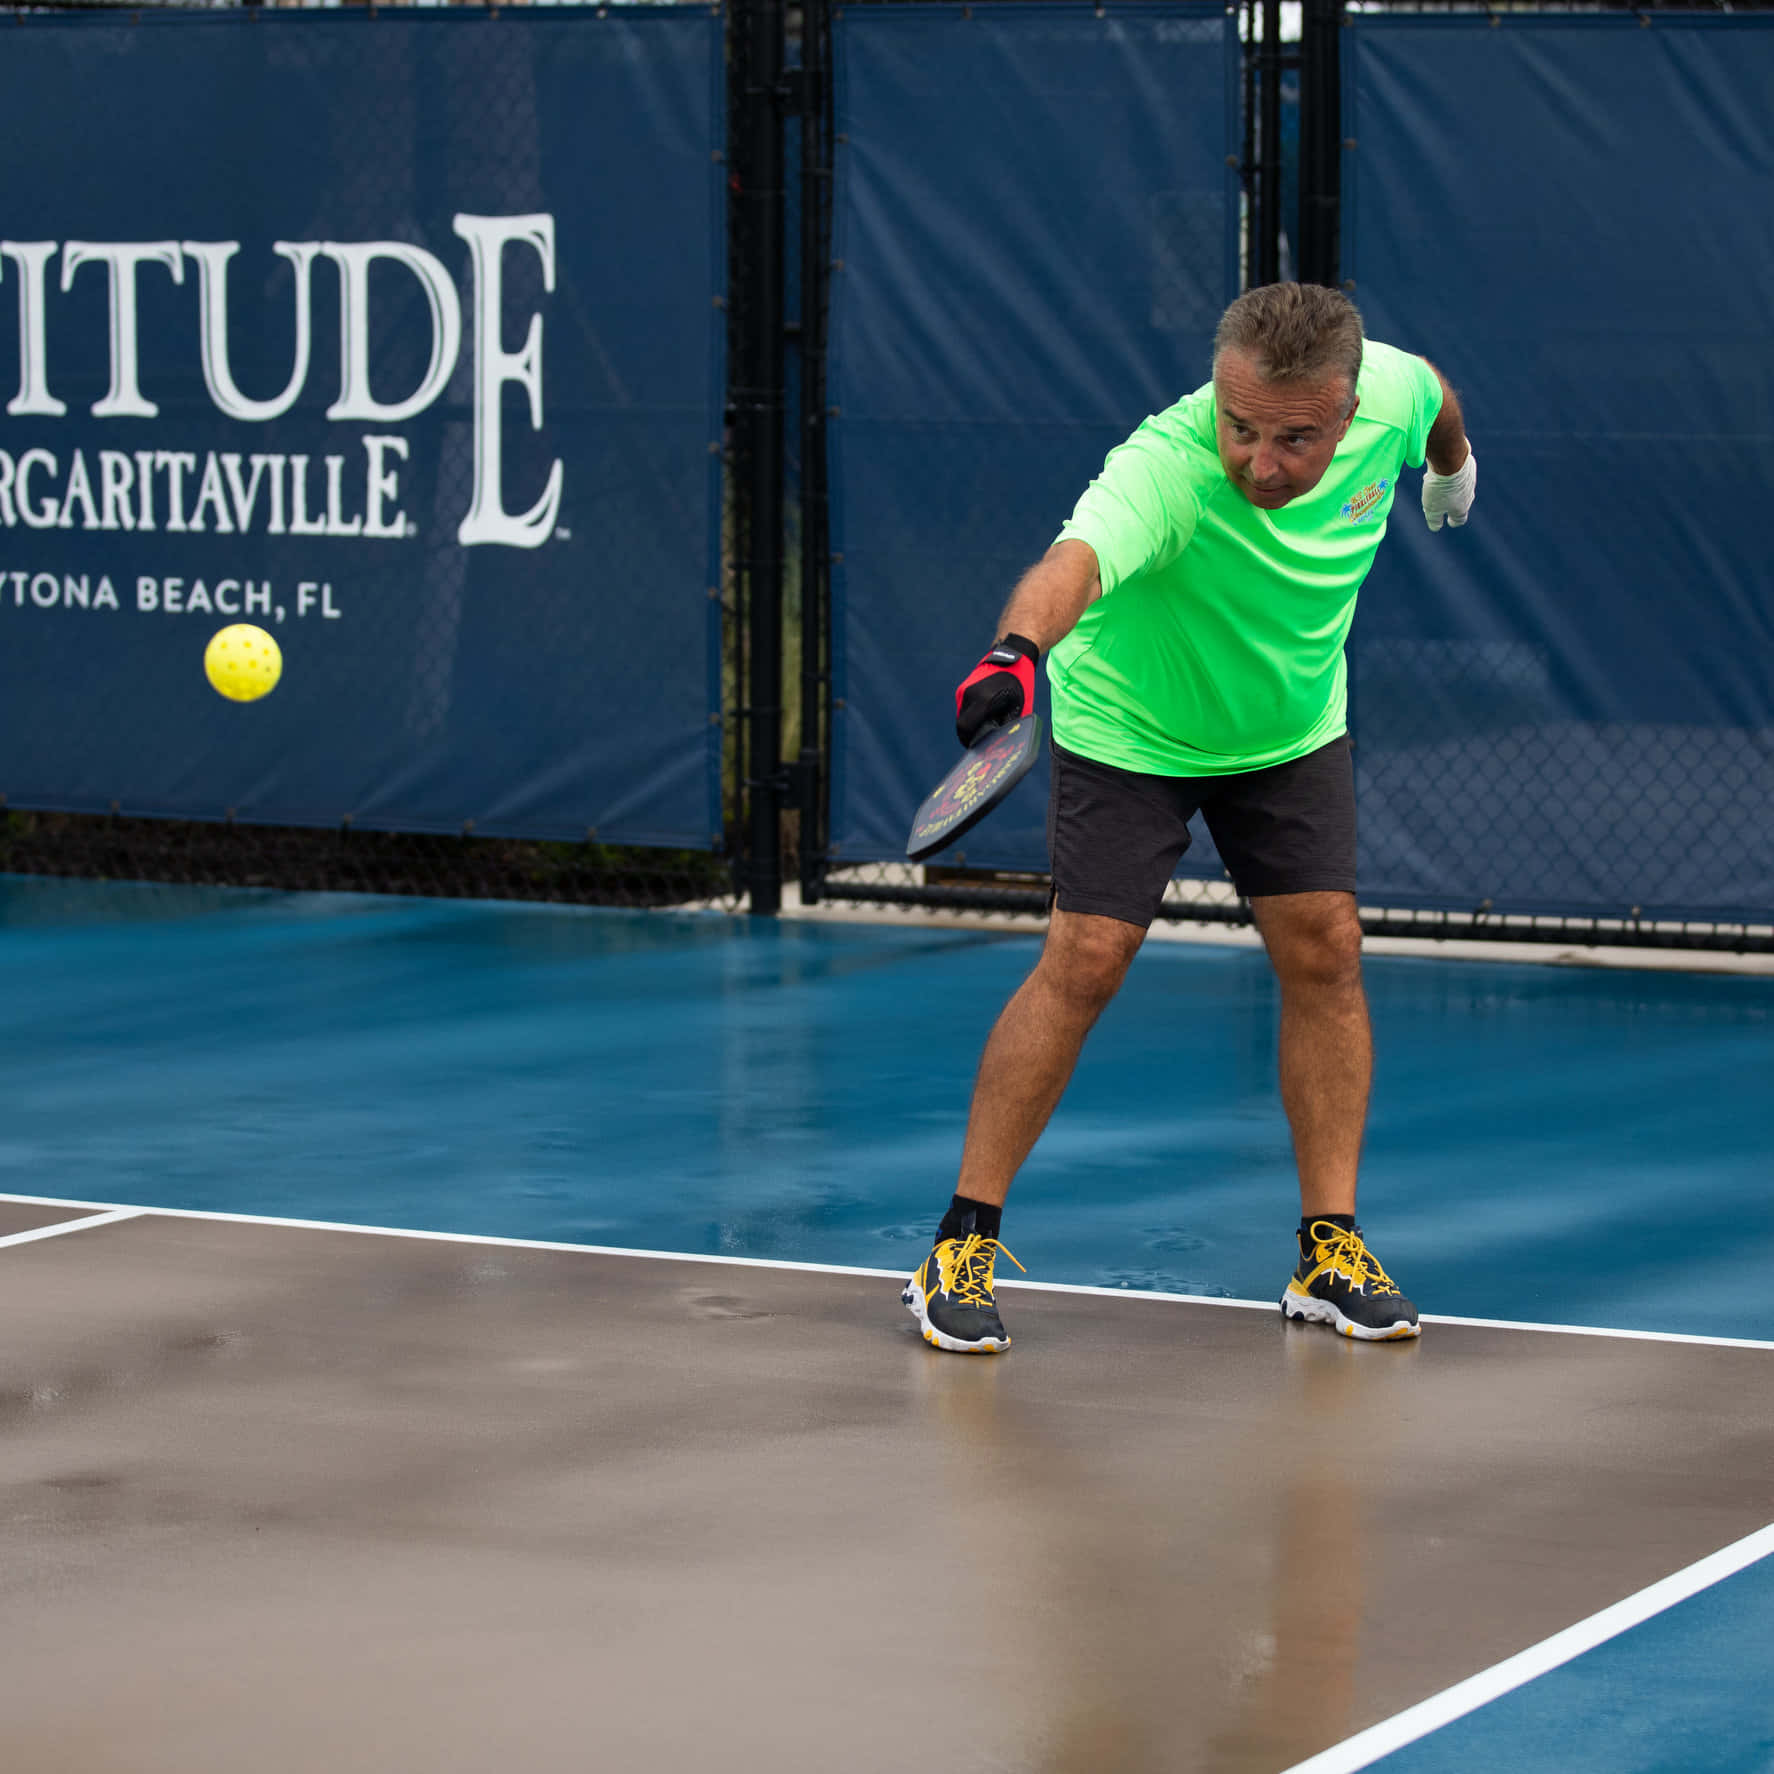 A Man Is Playing Tennis On A Court